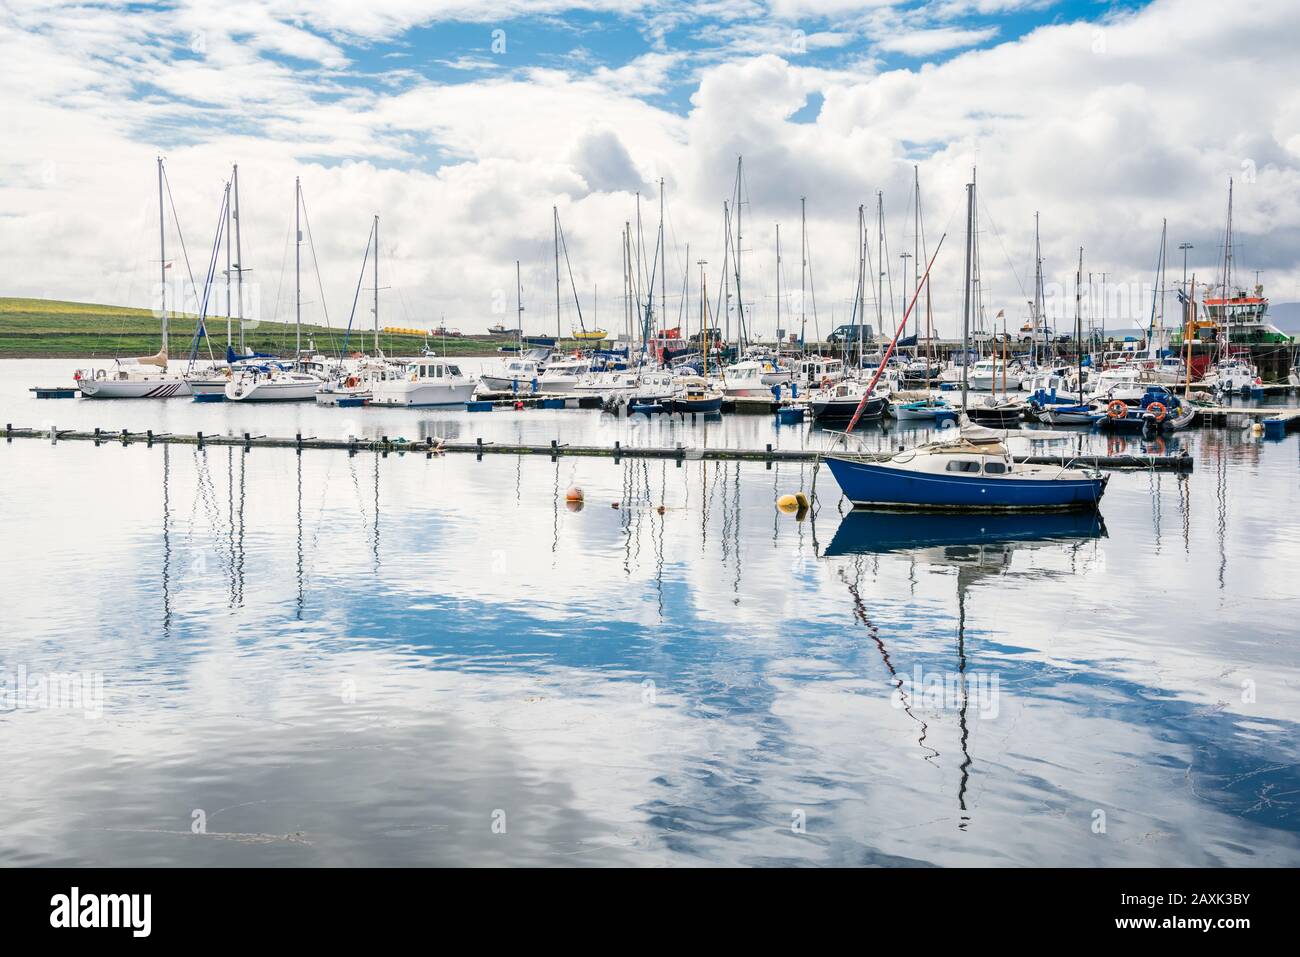 Yachts moored in a harbour on a partly cloudy summer day Stock Photo